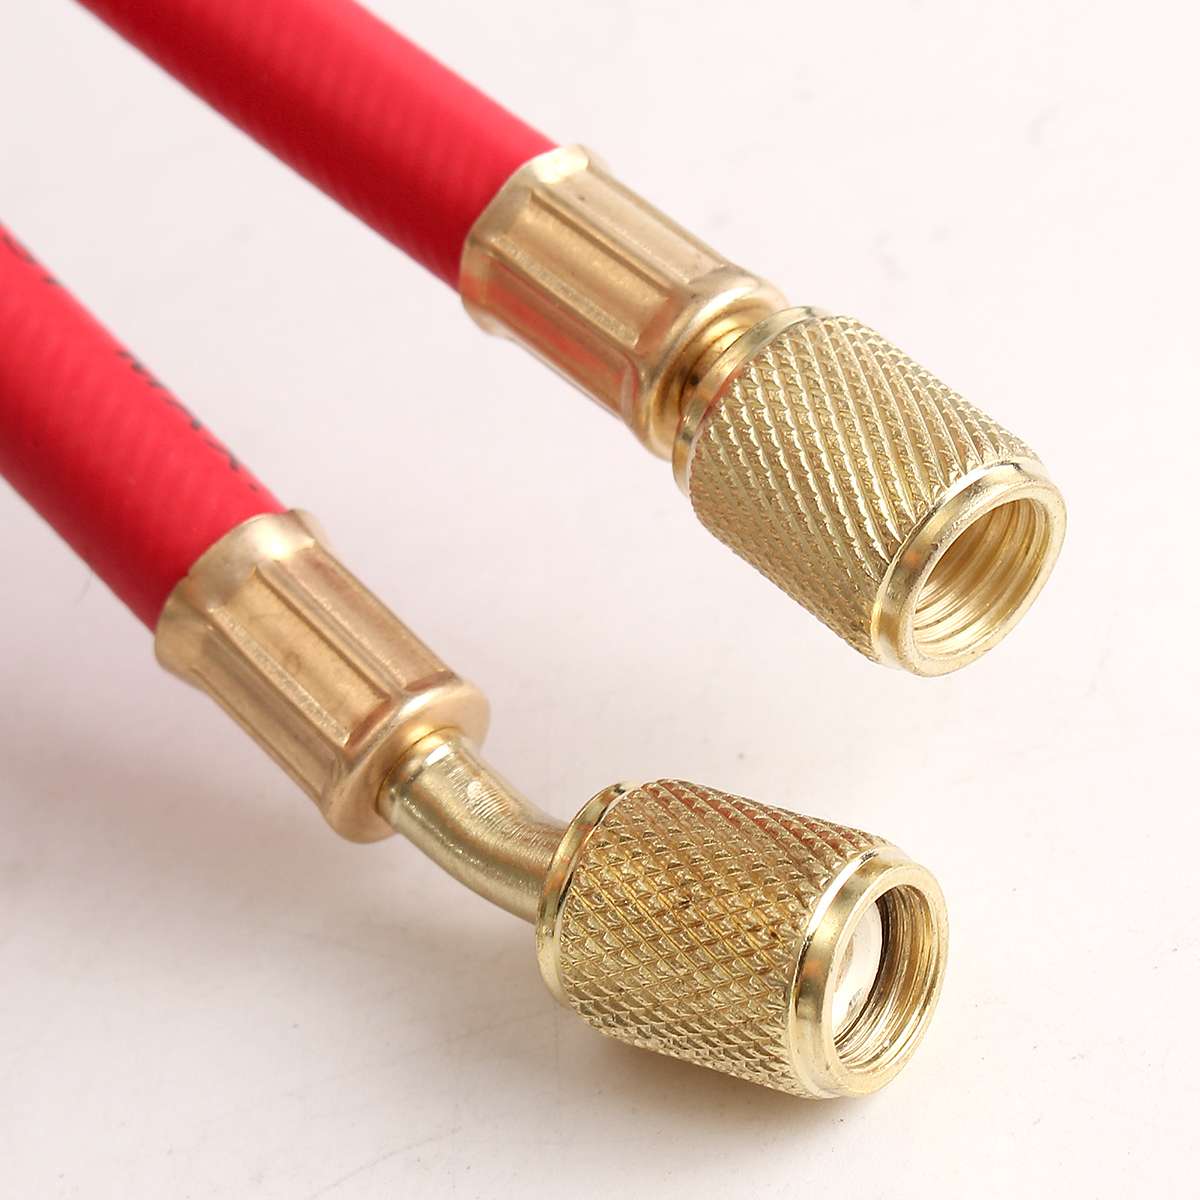 90CM R134A Car Charging Hose Refrigerant Measuring Recharge Adapter Coolant Pipe 14MM for R410a R22 R12 1/4" SAE Air Conditioner